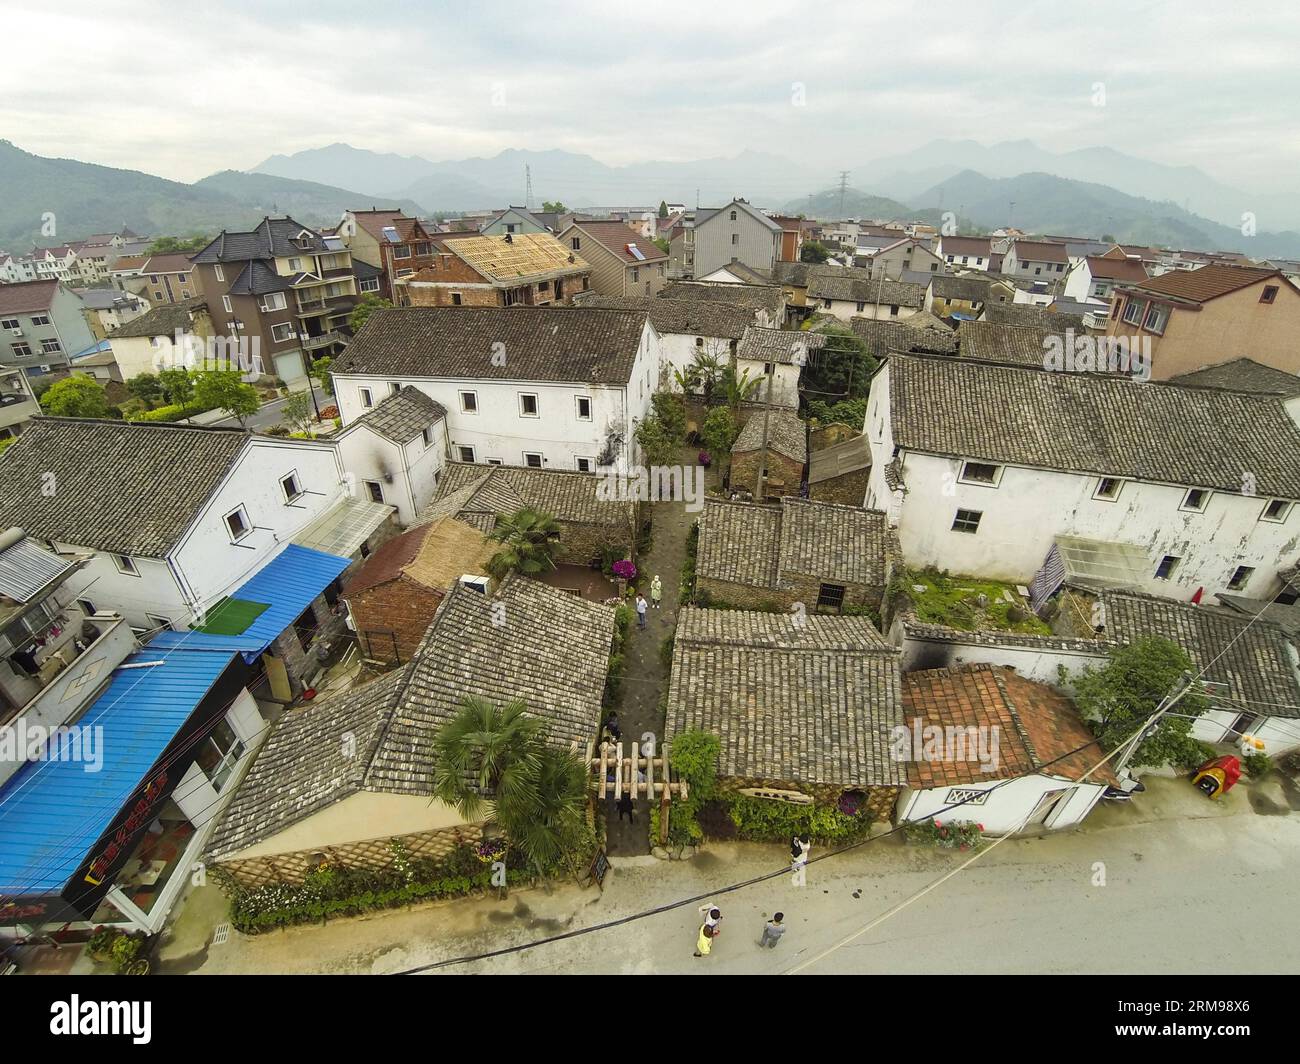 (140513) -- TONGLU, May 13, 2014 (Xinhua) -- Photo taken on May 13, 2014 shows the five houses of the swinery tea bar in Dipu Village of Jiangnan Town in Tonglu County, east China s Zhejiang Province. Dipu Village, a national historical and cultural village with nearly a thousand years history, has committed to environment reform, village protection and tourism development for the past few years. The swinery tea bar sets a successful example of the transform. The bar used to be five messy stone houses for pigs keeping. After renovation, it functions as a modern tea bar with traditional appeara Stock Photo